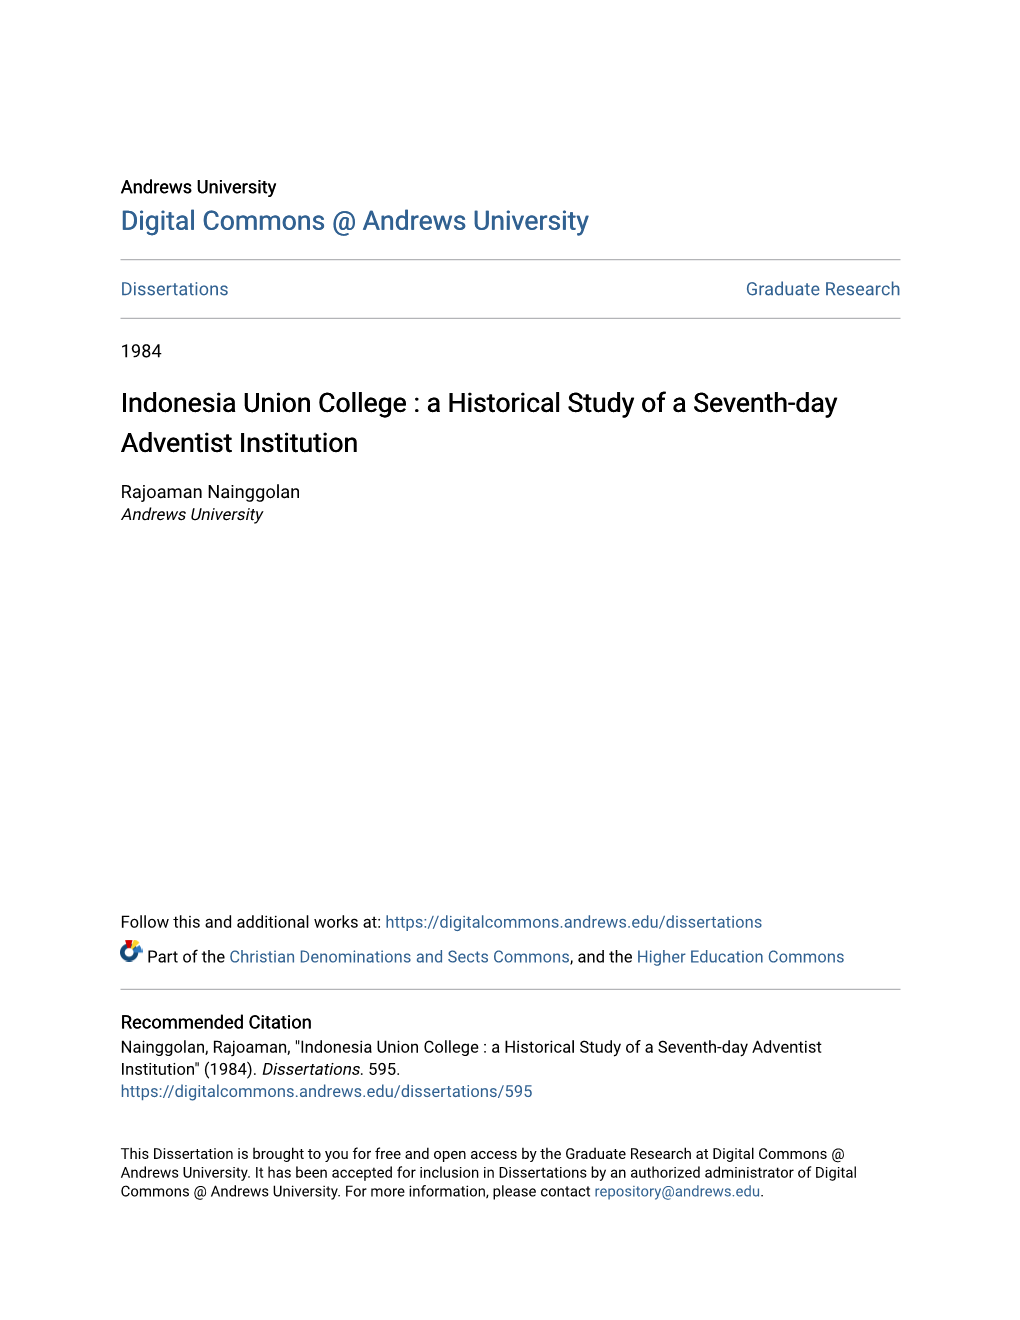 Indonesia Union College : a Historical Study of a Seventh-Day Adventist Institution